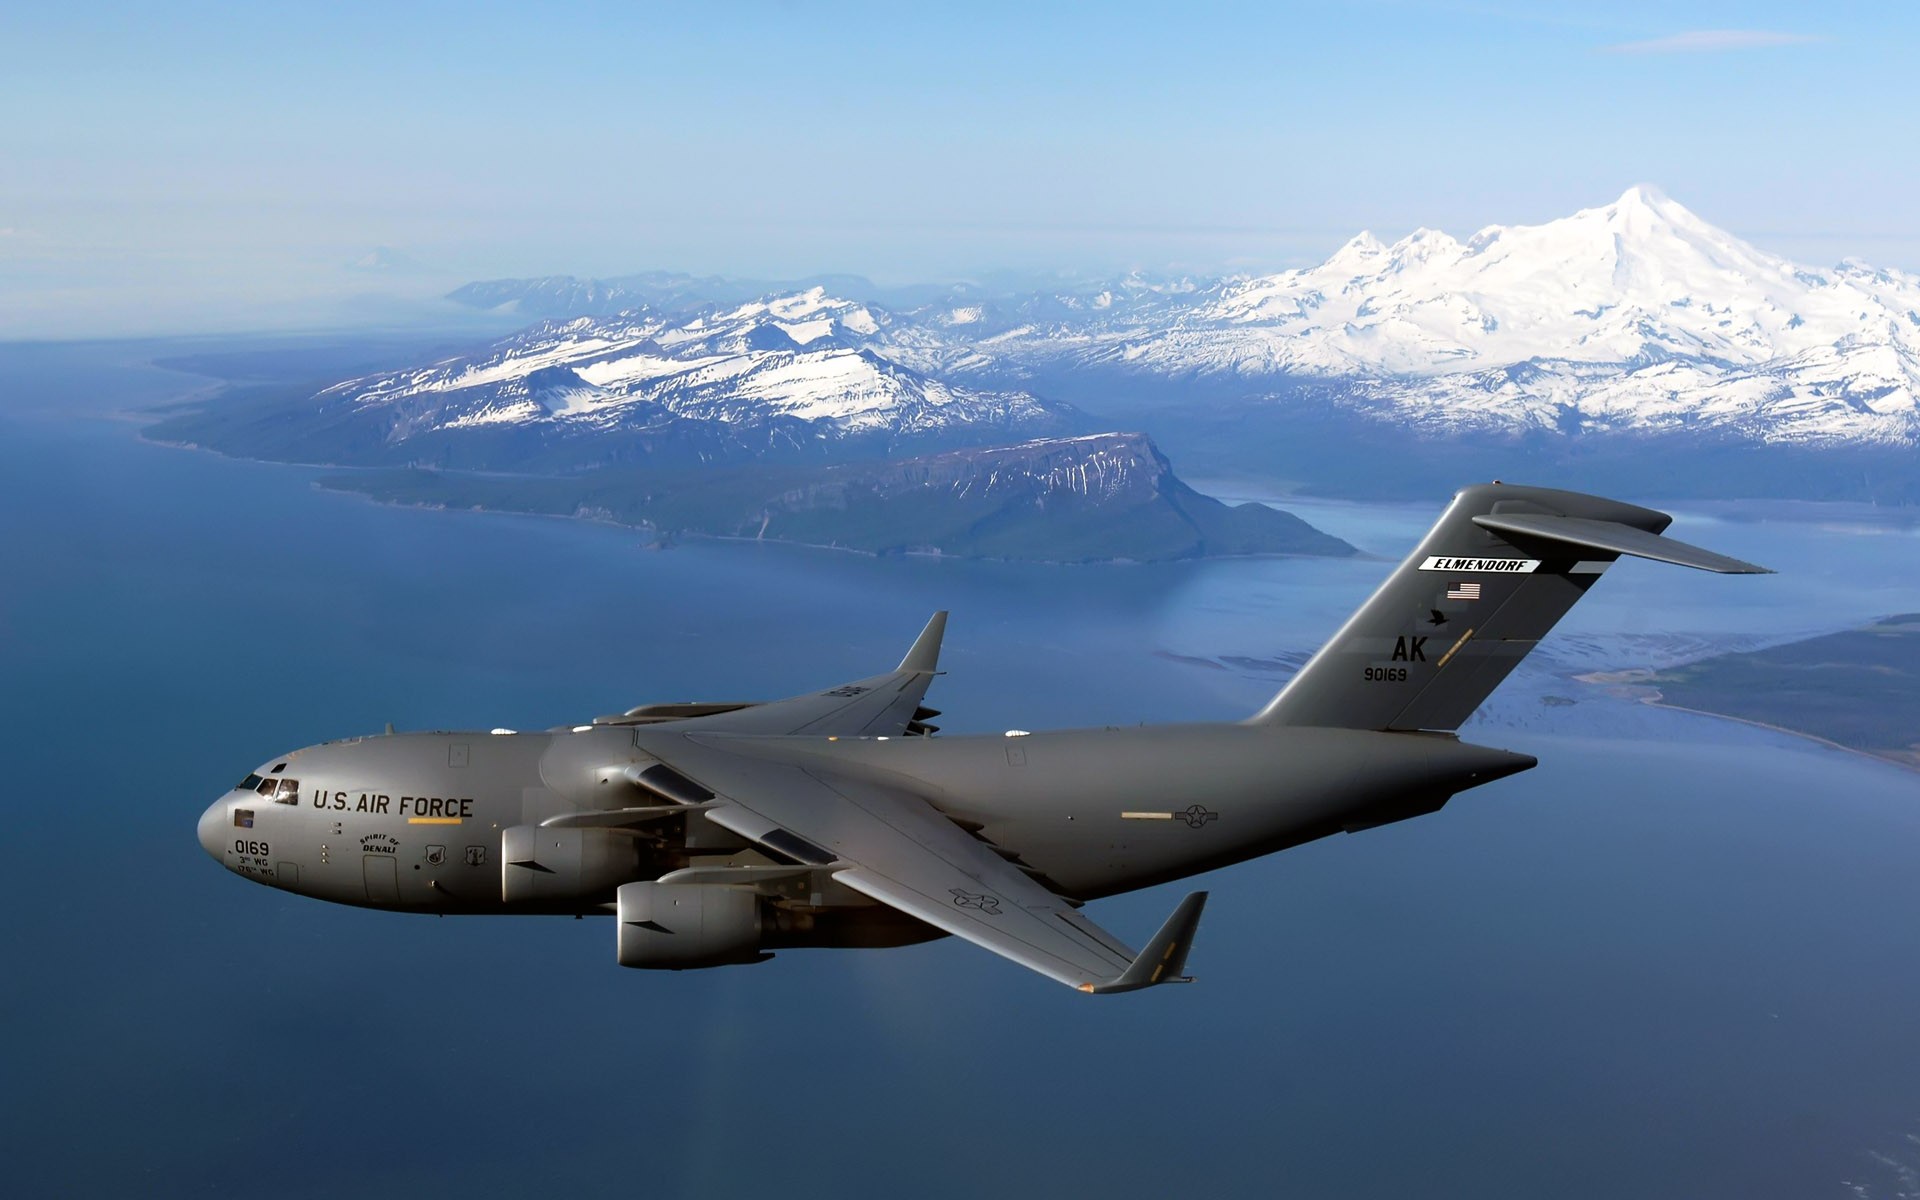 General 1920x1200 airplane sky snowy mountain mountain top air force ocean view Boeing C-17 Globemaster III c++ military military aircraft vehicle military vehicle numbers